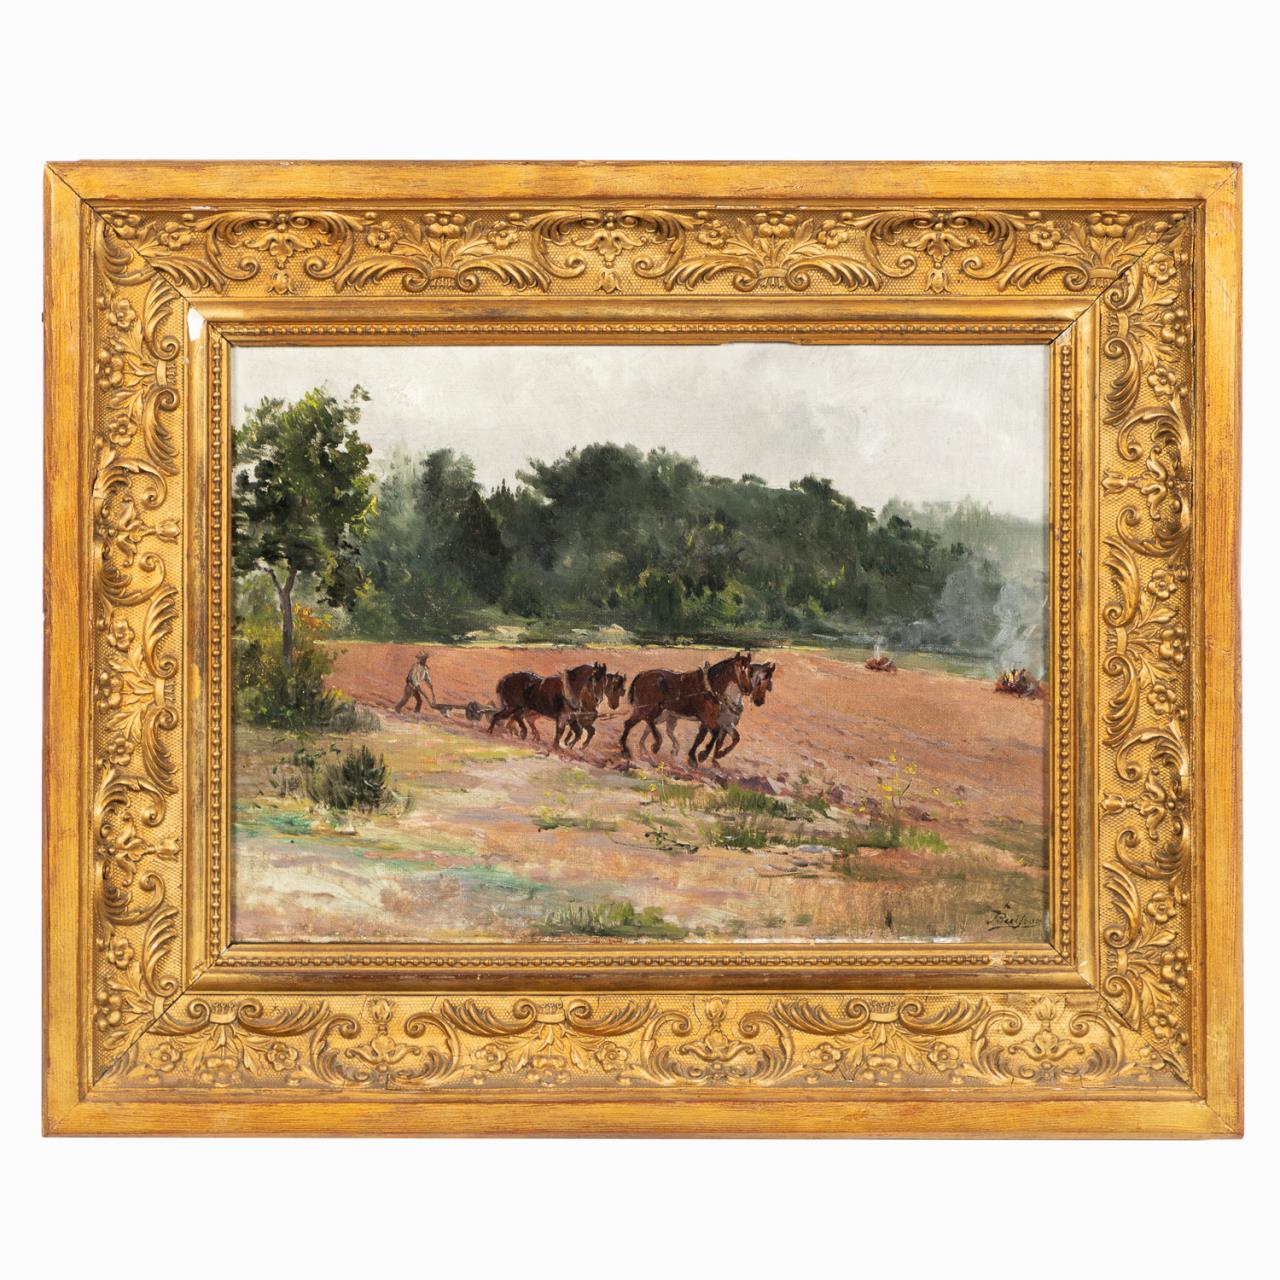 BUISSON, FRENCH FARM OIL ON CANVAS,